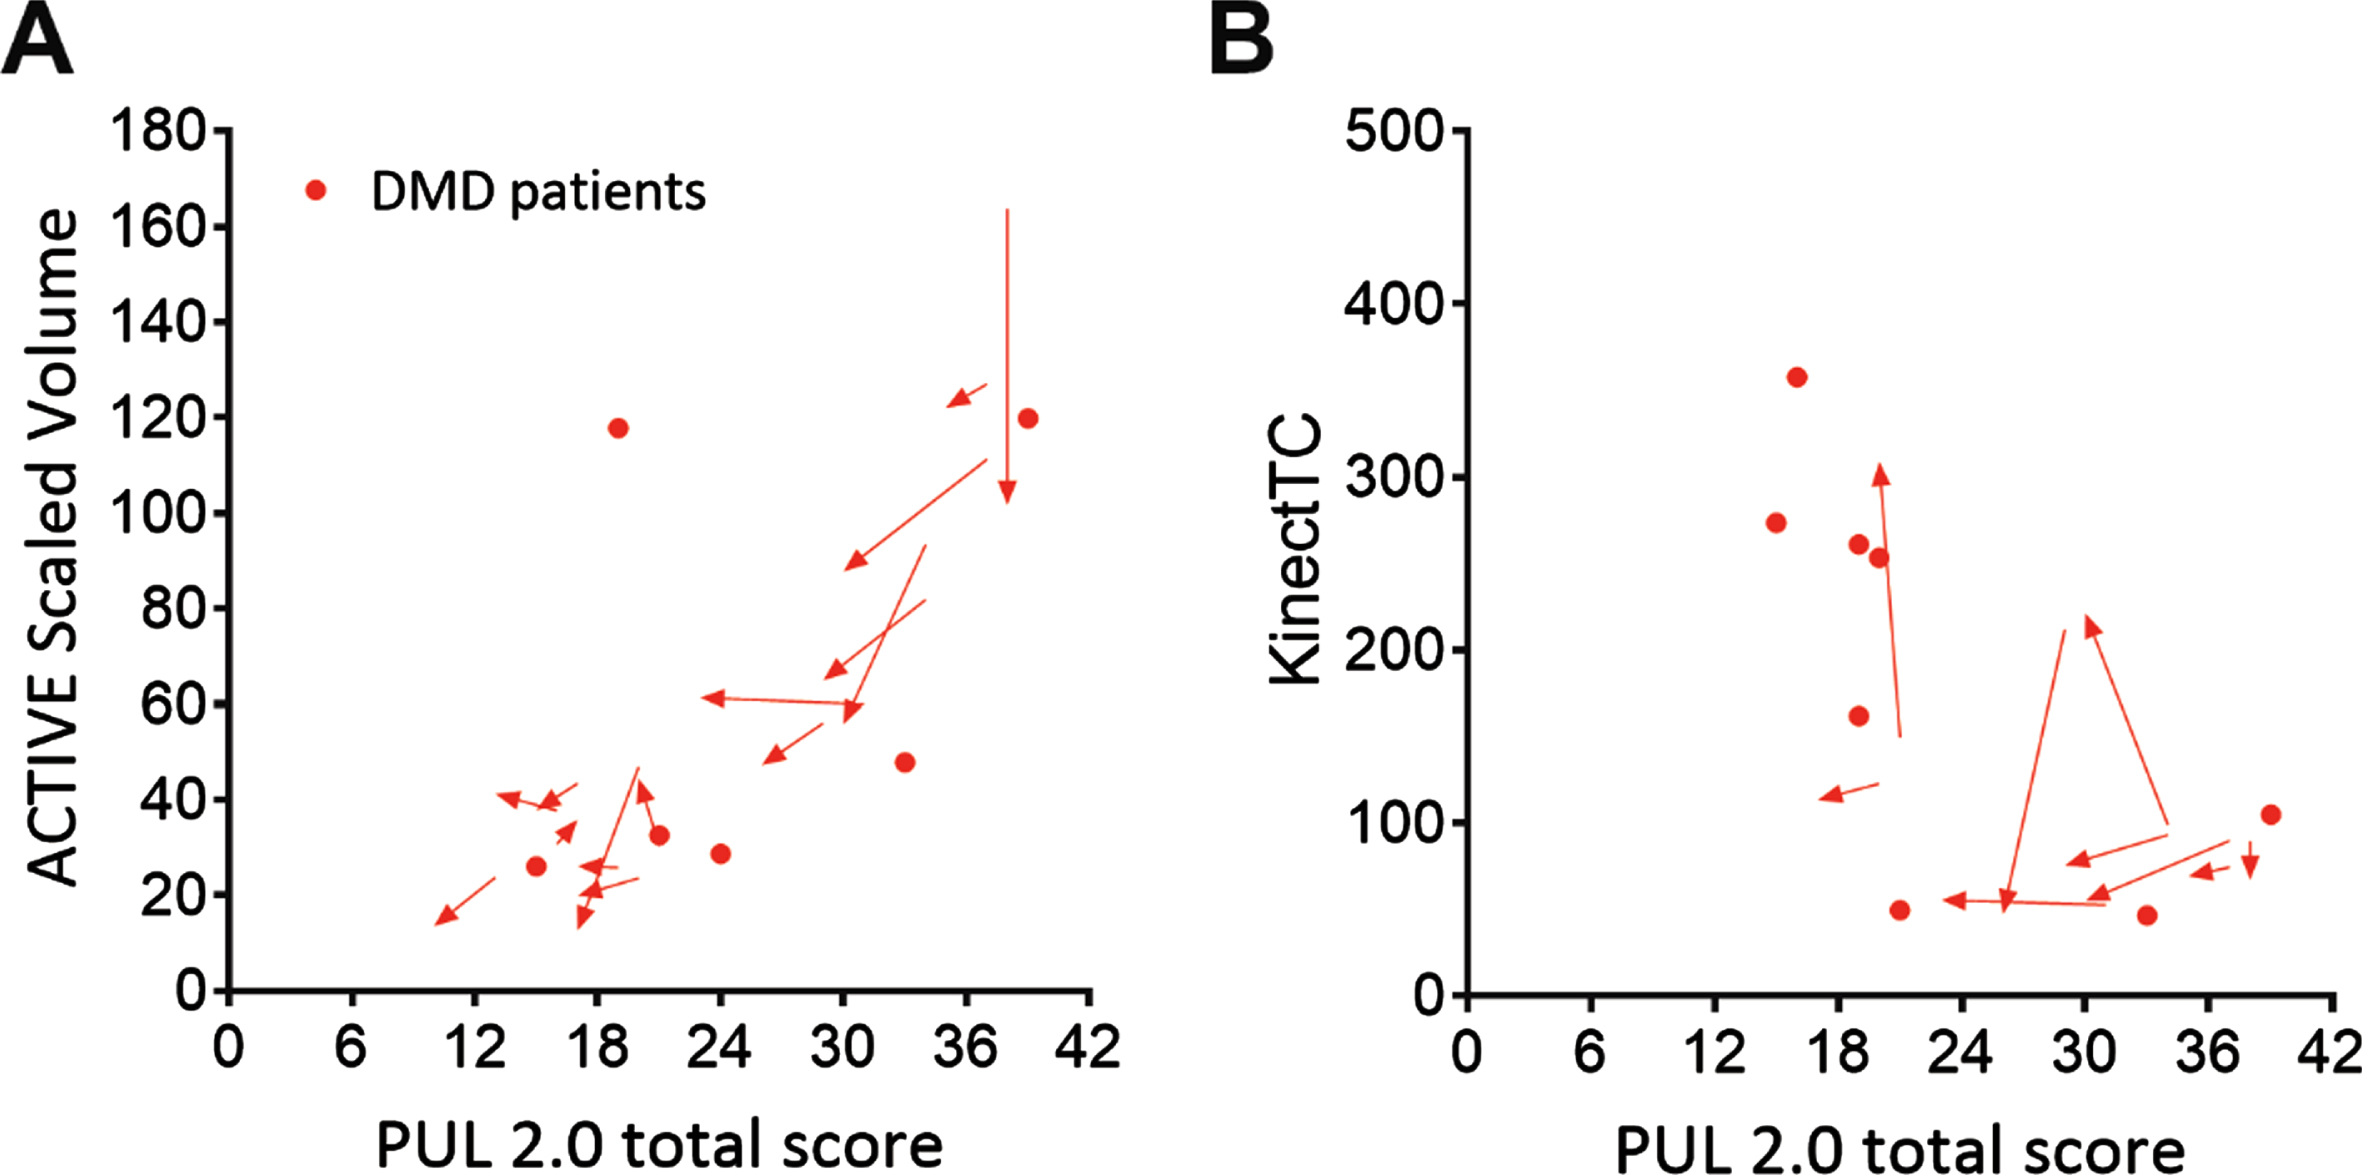 ACTIVE and KinectTC change over time and relation with function tests. ACTIVE Scaled Volume plotted for baseline and 12 months follow-up of Duchenne muscular dystrophy (DMD) patients (red) against Performance of the Upper Limb (PUL) 2.0 total score in (A). Correlation was strong with PUL 2.0 (rho = 0.76). ACTIVE Scaled Volume did decrease significantly over 12 months. KinectTC scaled trunk distance (trunk compensation in mm as a ratio to height in m) is plotted for baseline and 12 months follow-up of DMD patients against PUL 2.0 total score in (B). Correlation was moderate with PUL 2.0 (rho = –0.69).